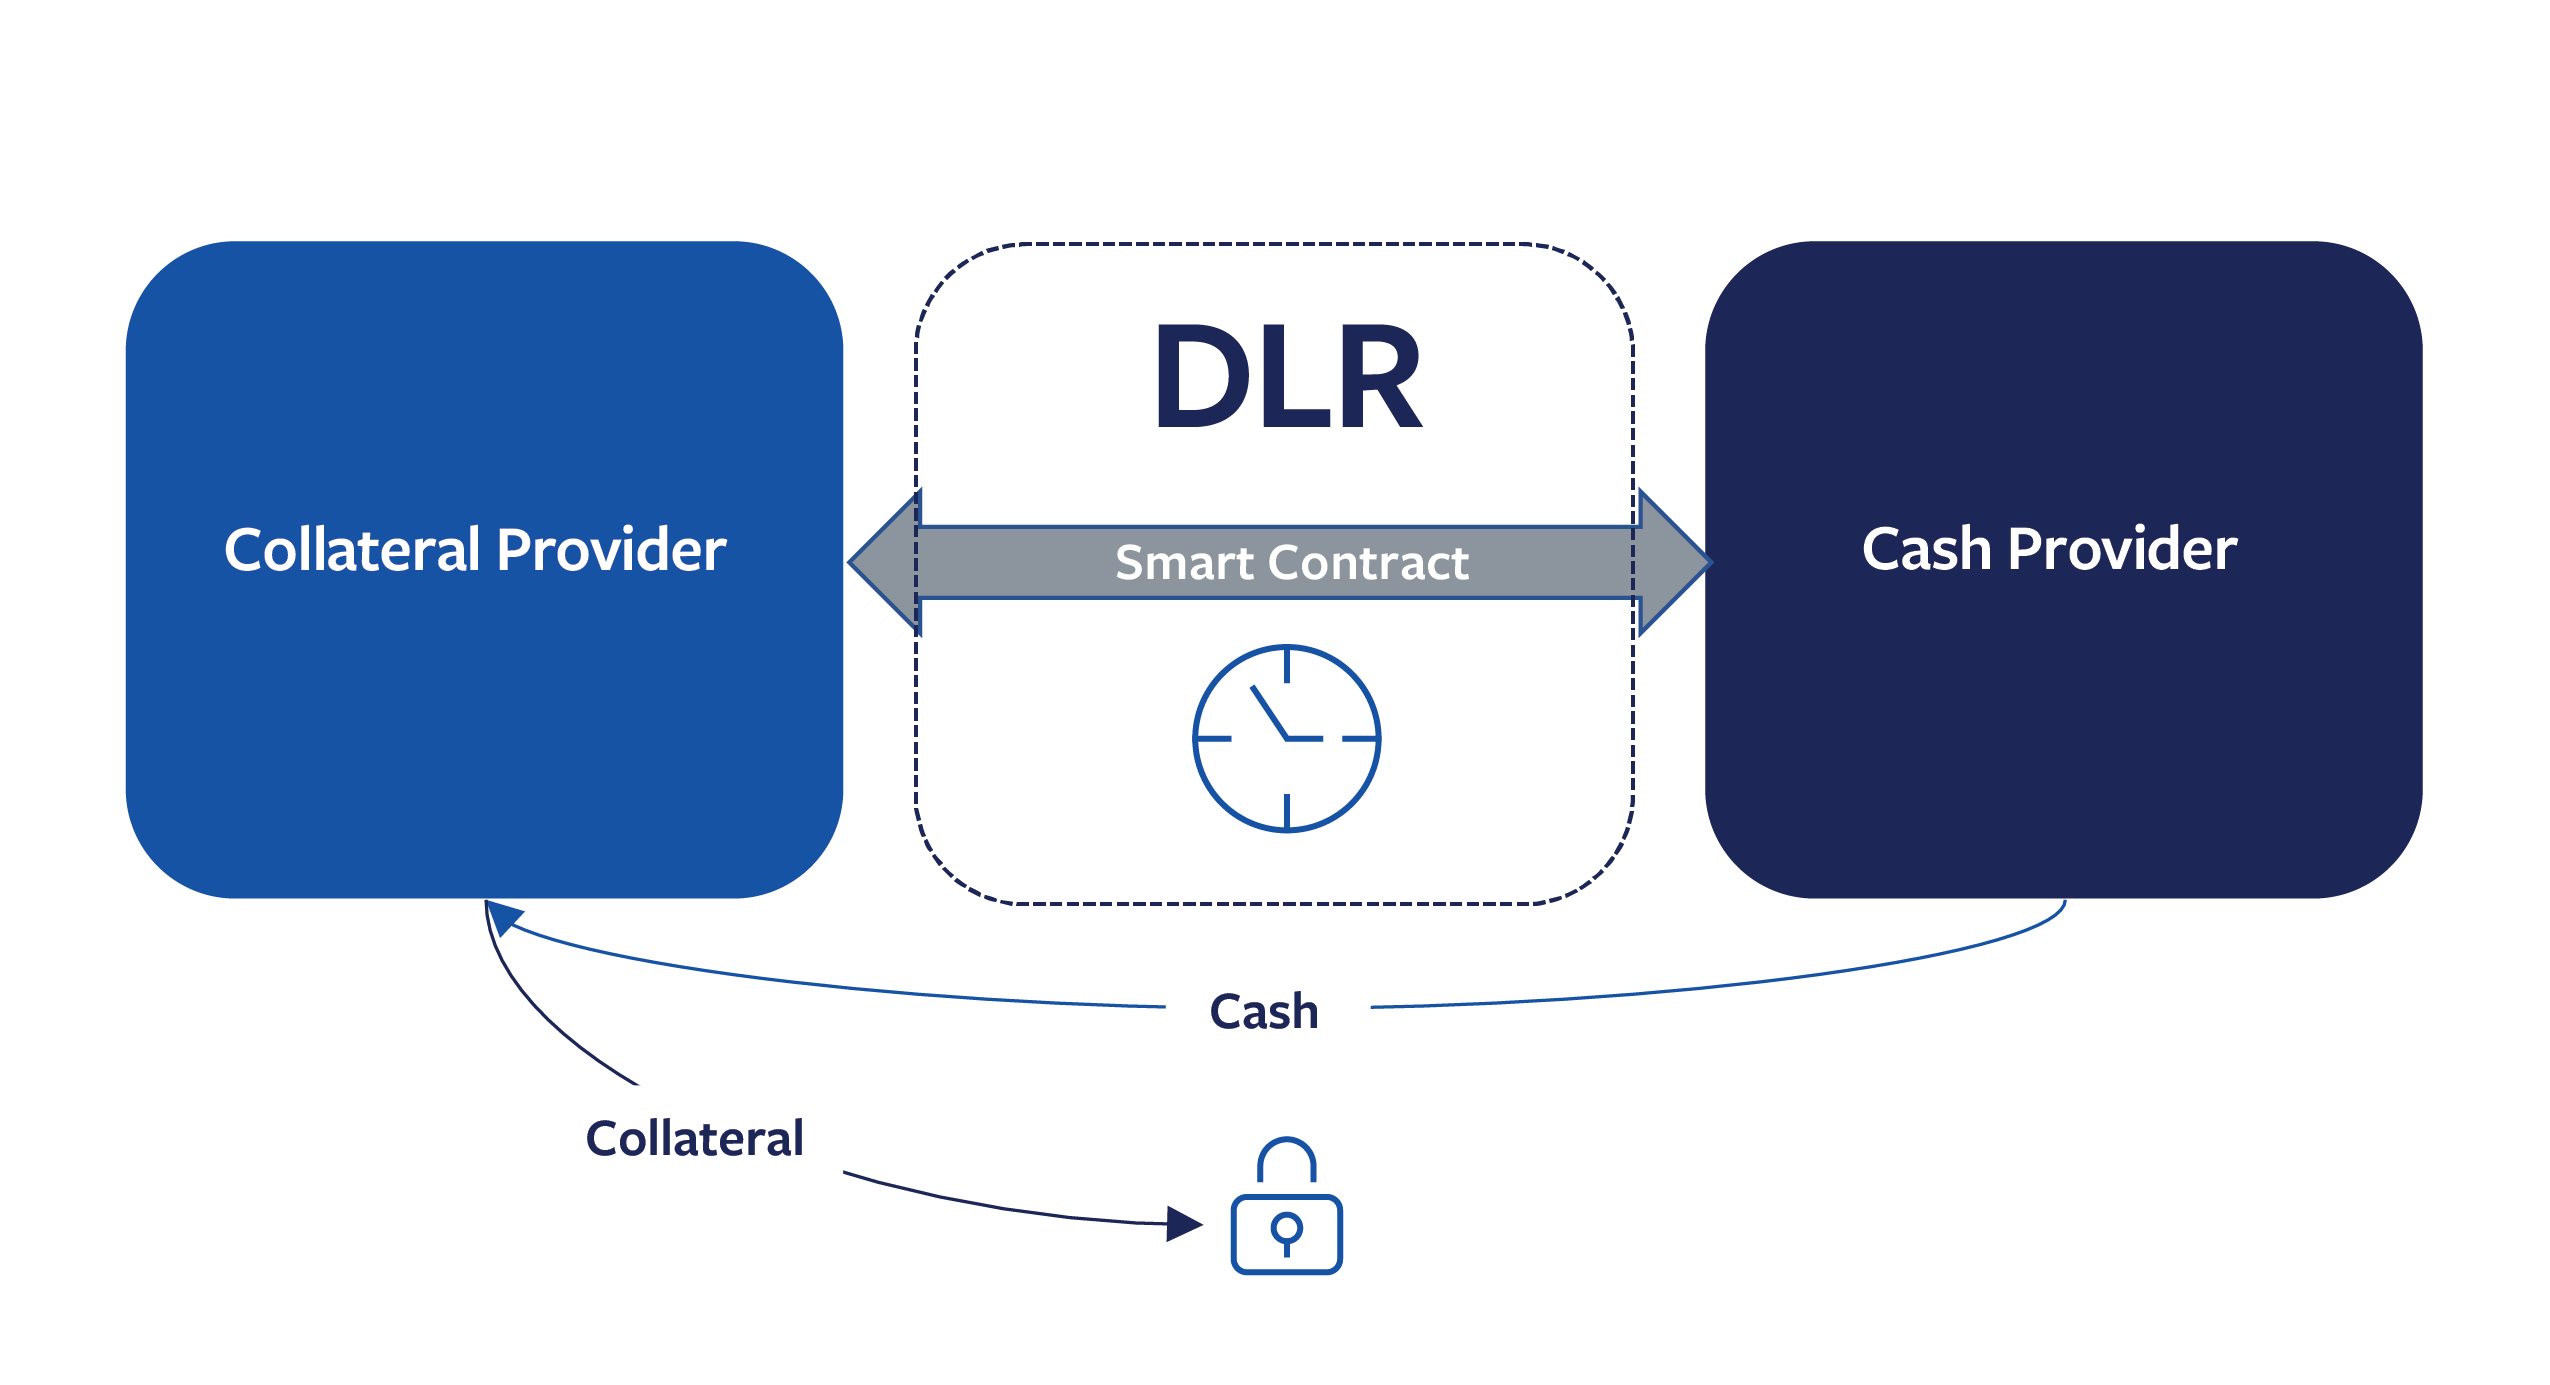 DLR Smart Contract